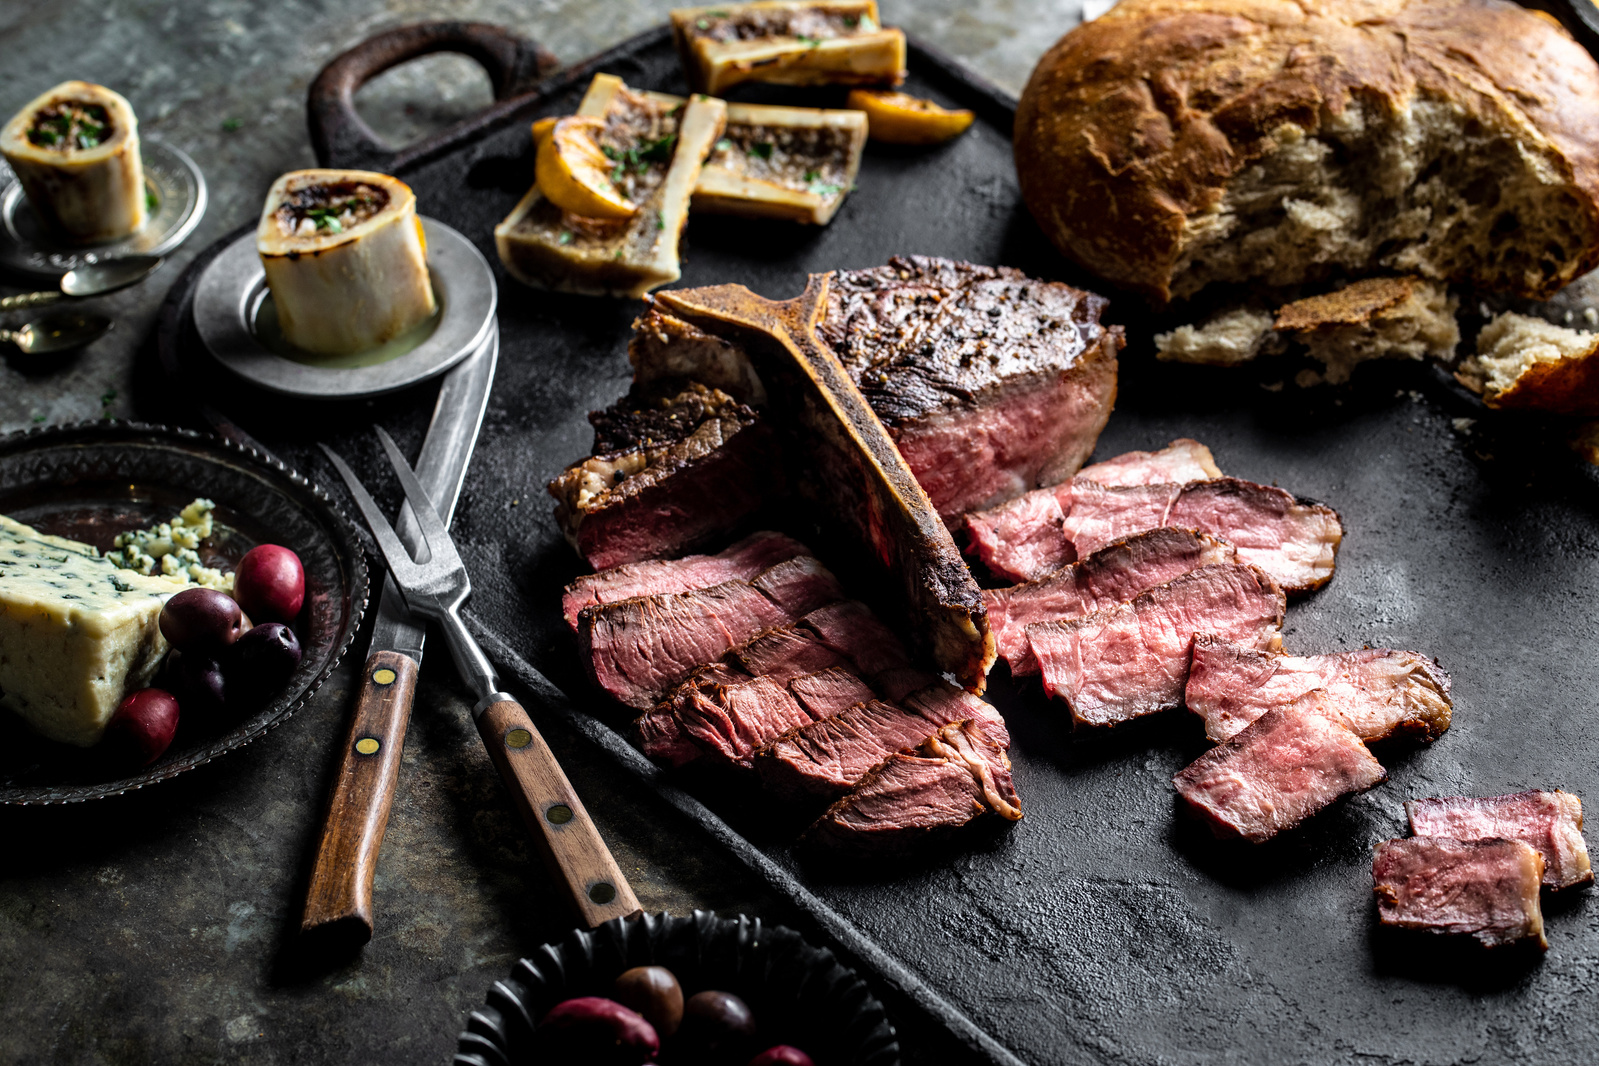 Food meat photography of a slices medium rare T-bone steak on slate with utensils, bread, and other props. 